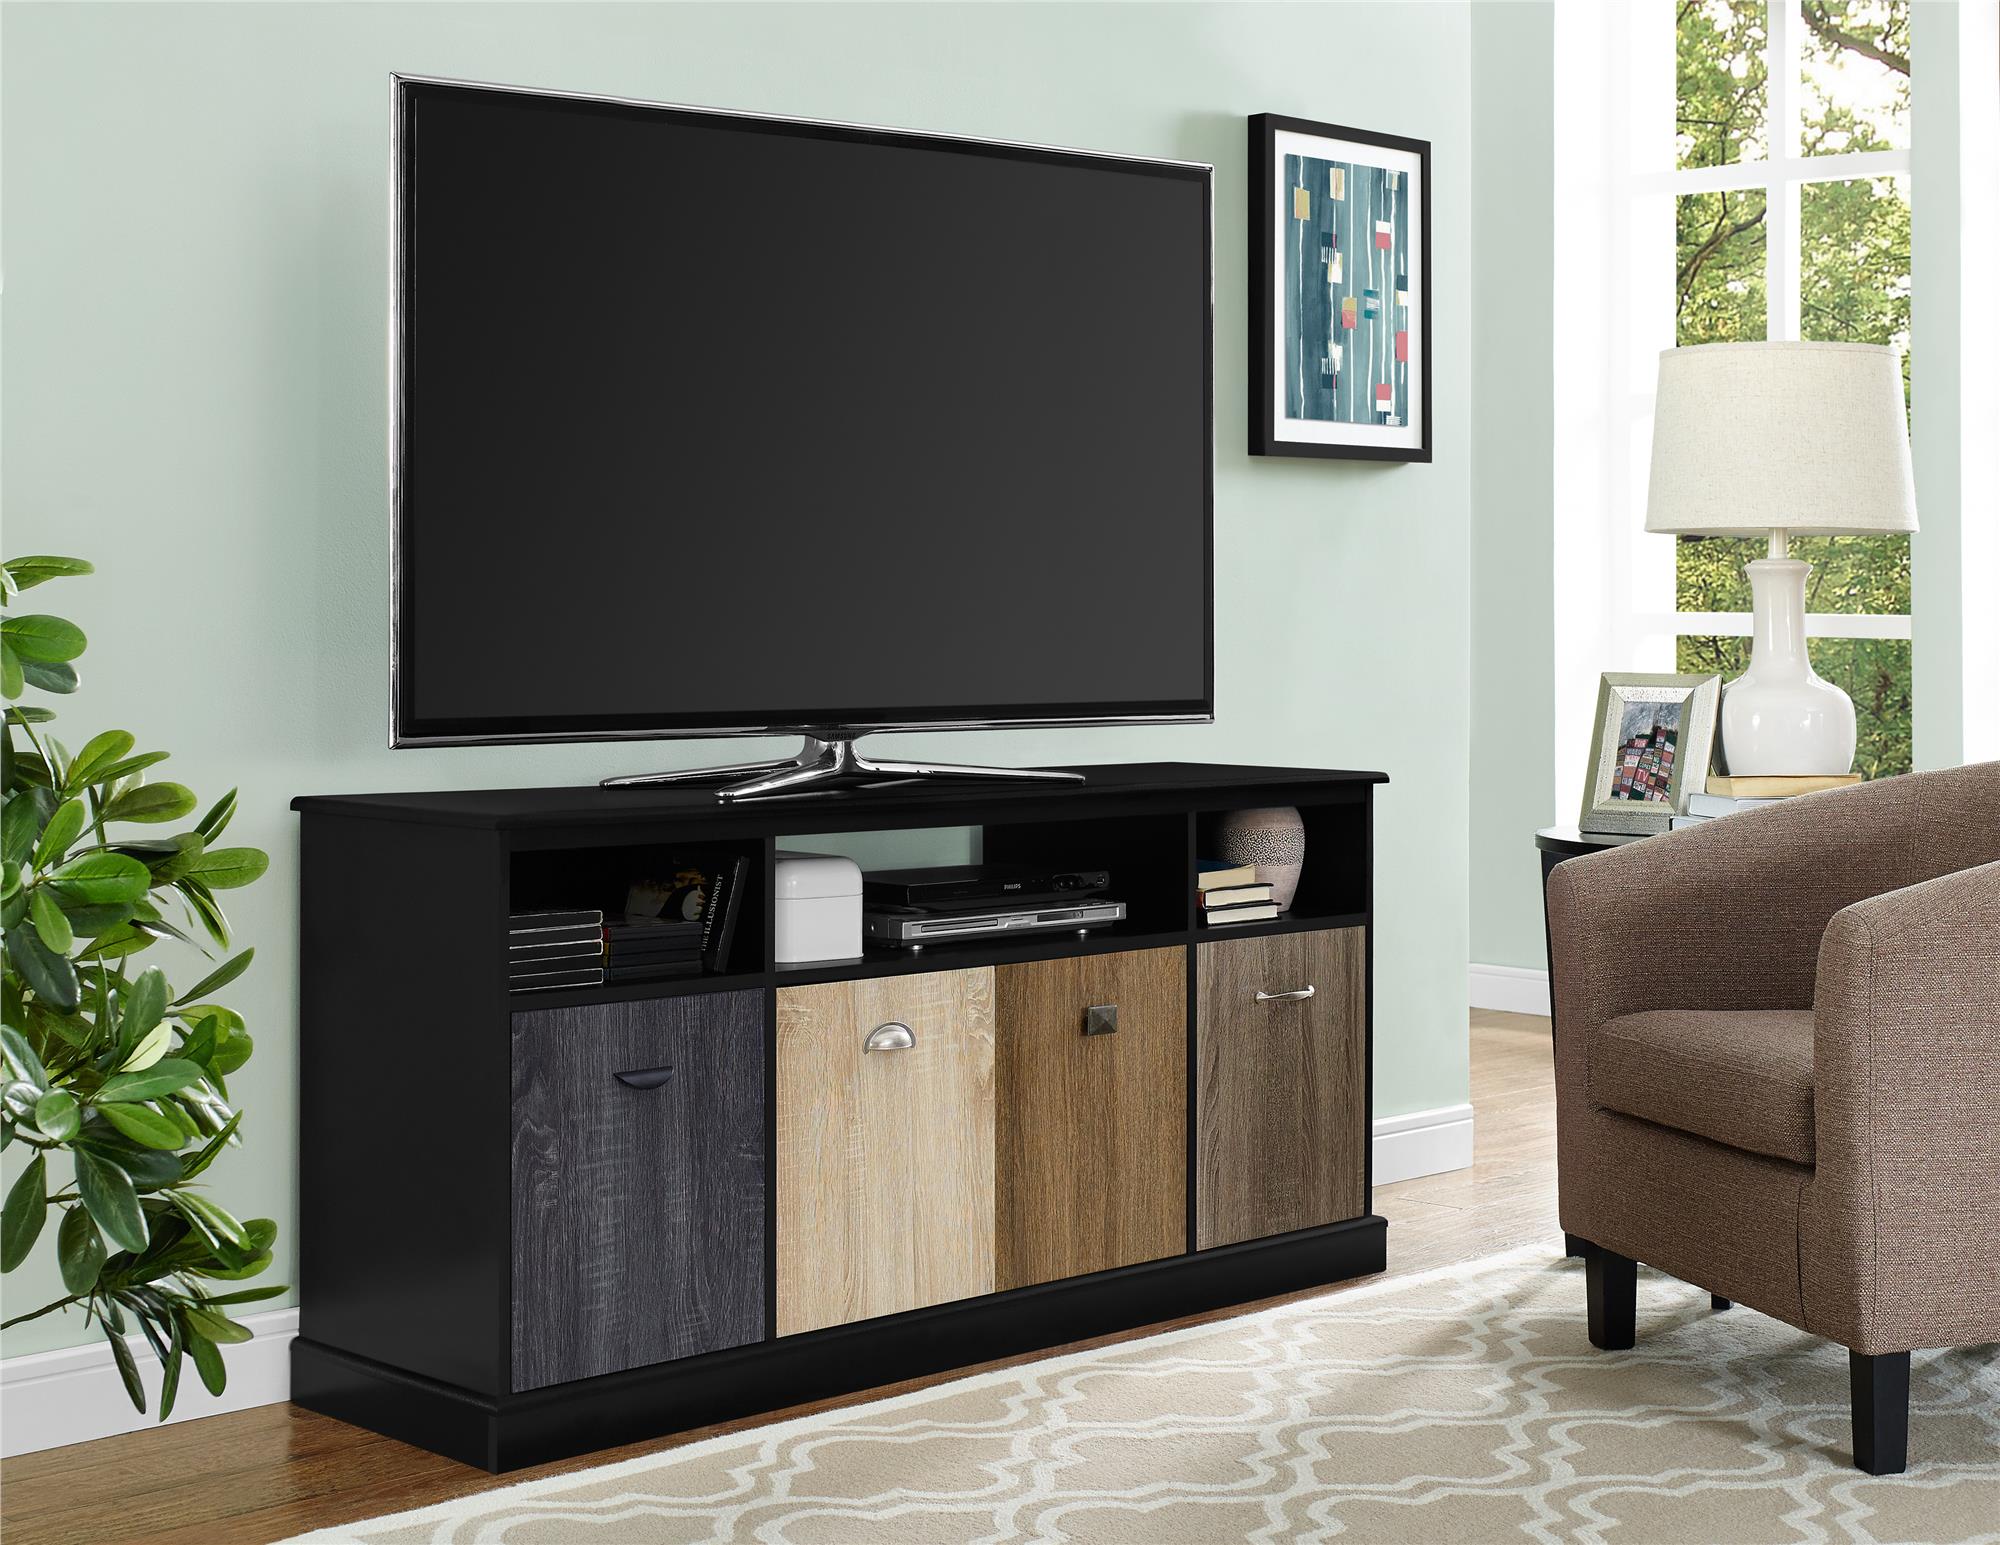 Ameriwood Home Mercer 60" TV Console with Multicolored Door Fronts, Multiple Colors - Black - image 1 of 5